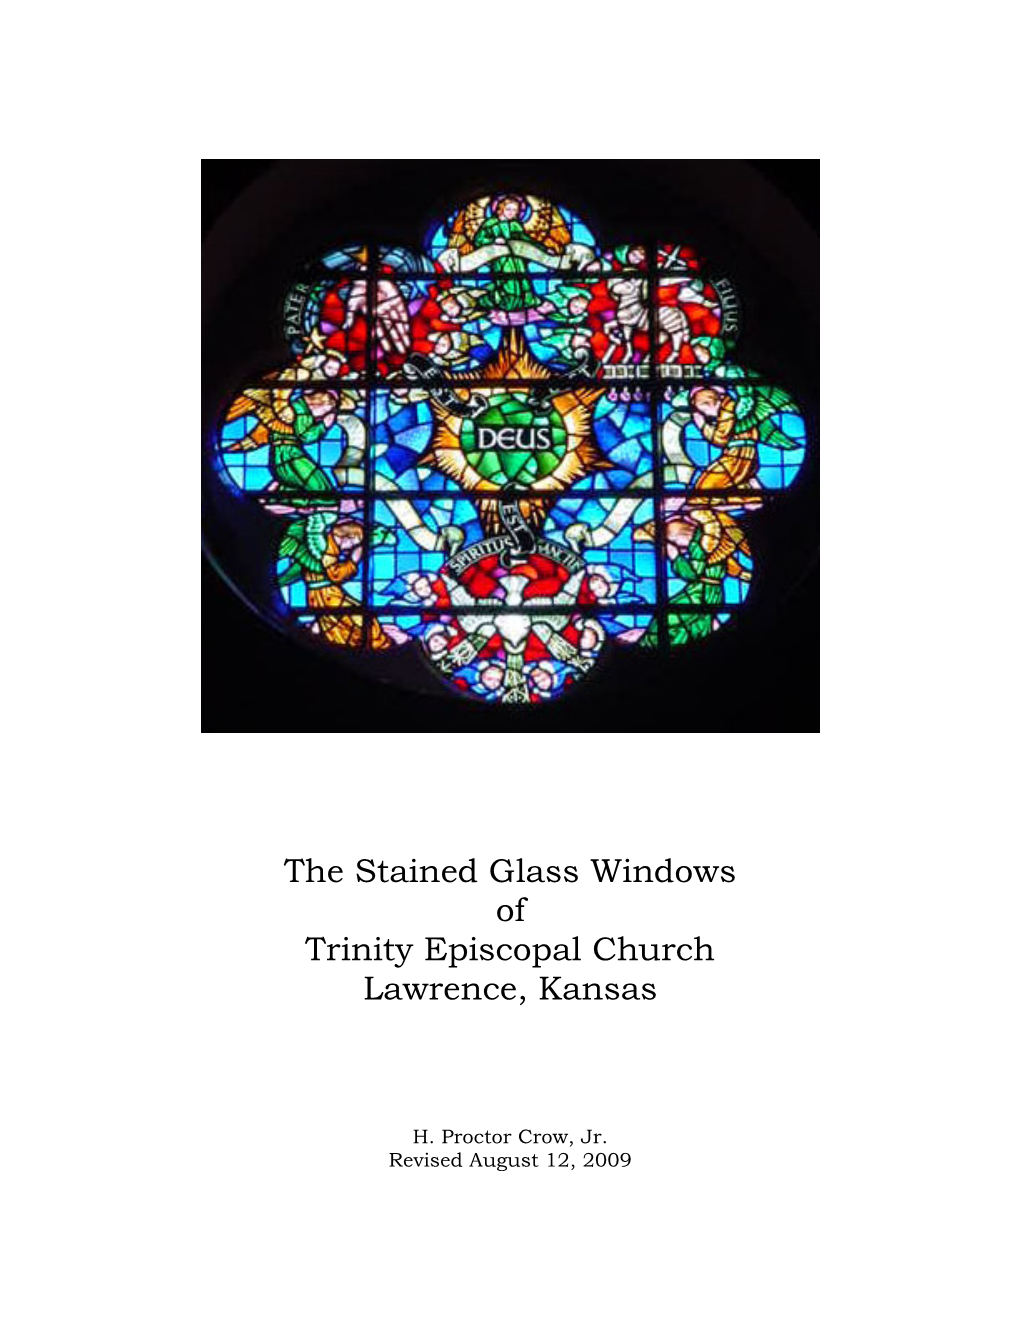 The Stained Glass Windows of Trinity Episcopal Church Lawrence, Kansas